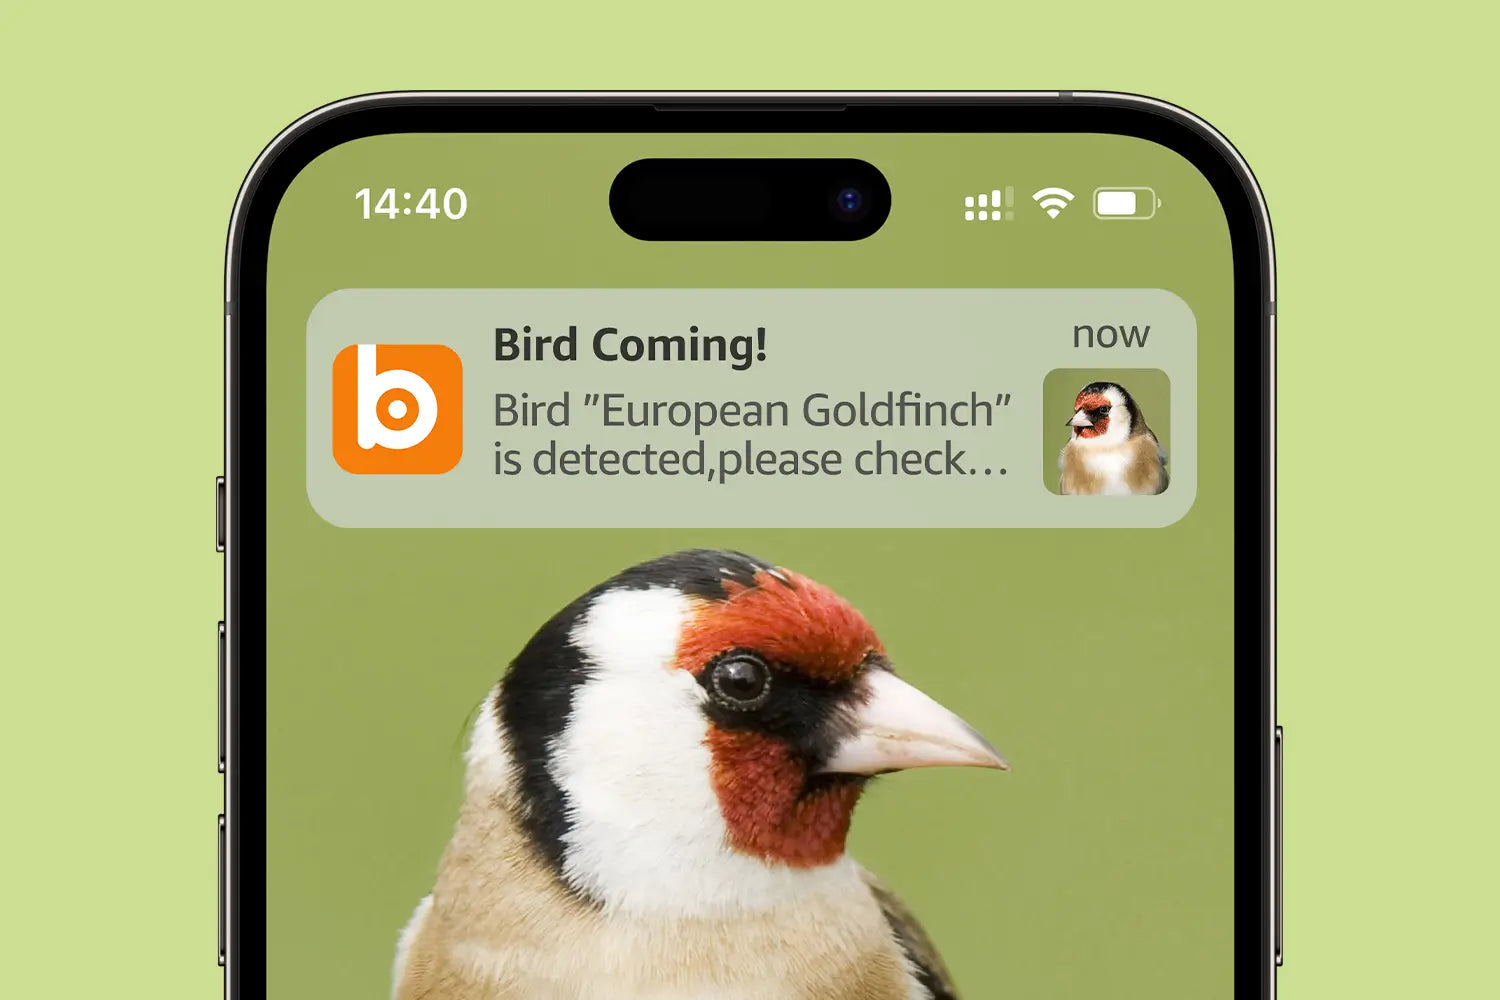 Receive timely notifications whenever birds visit